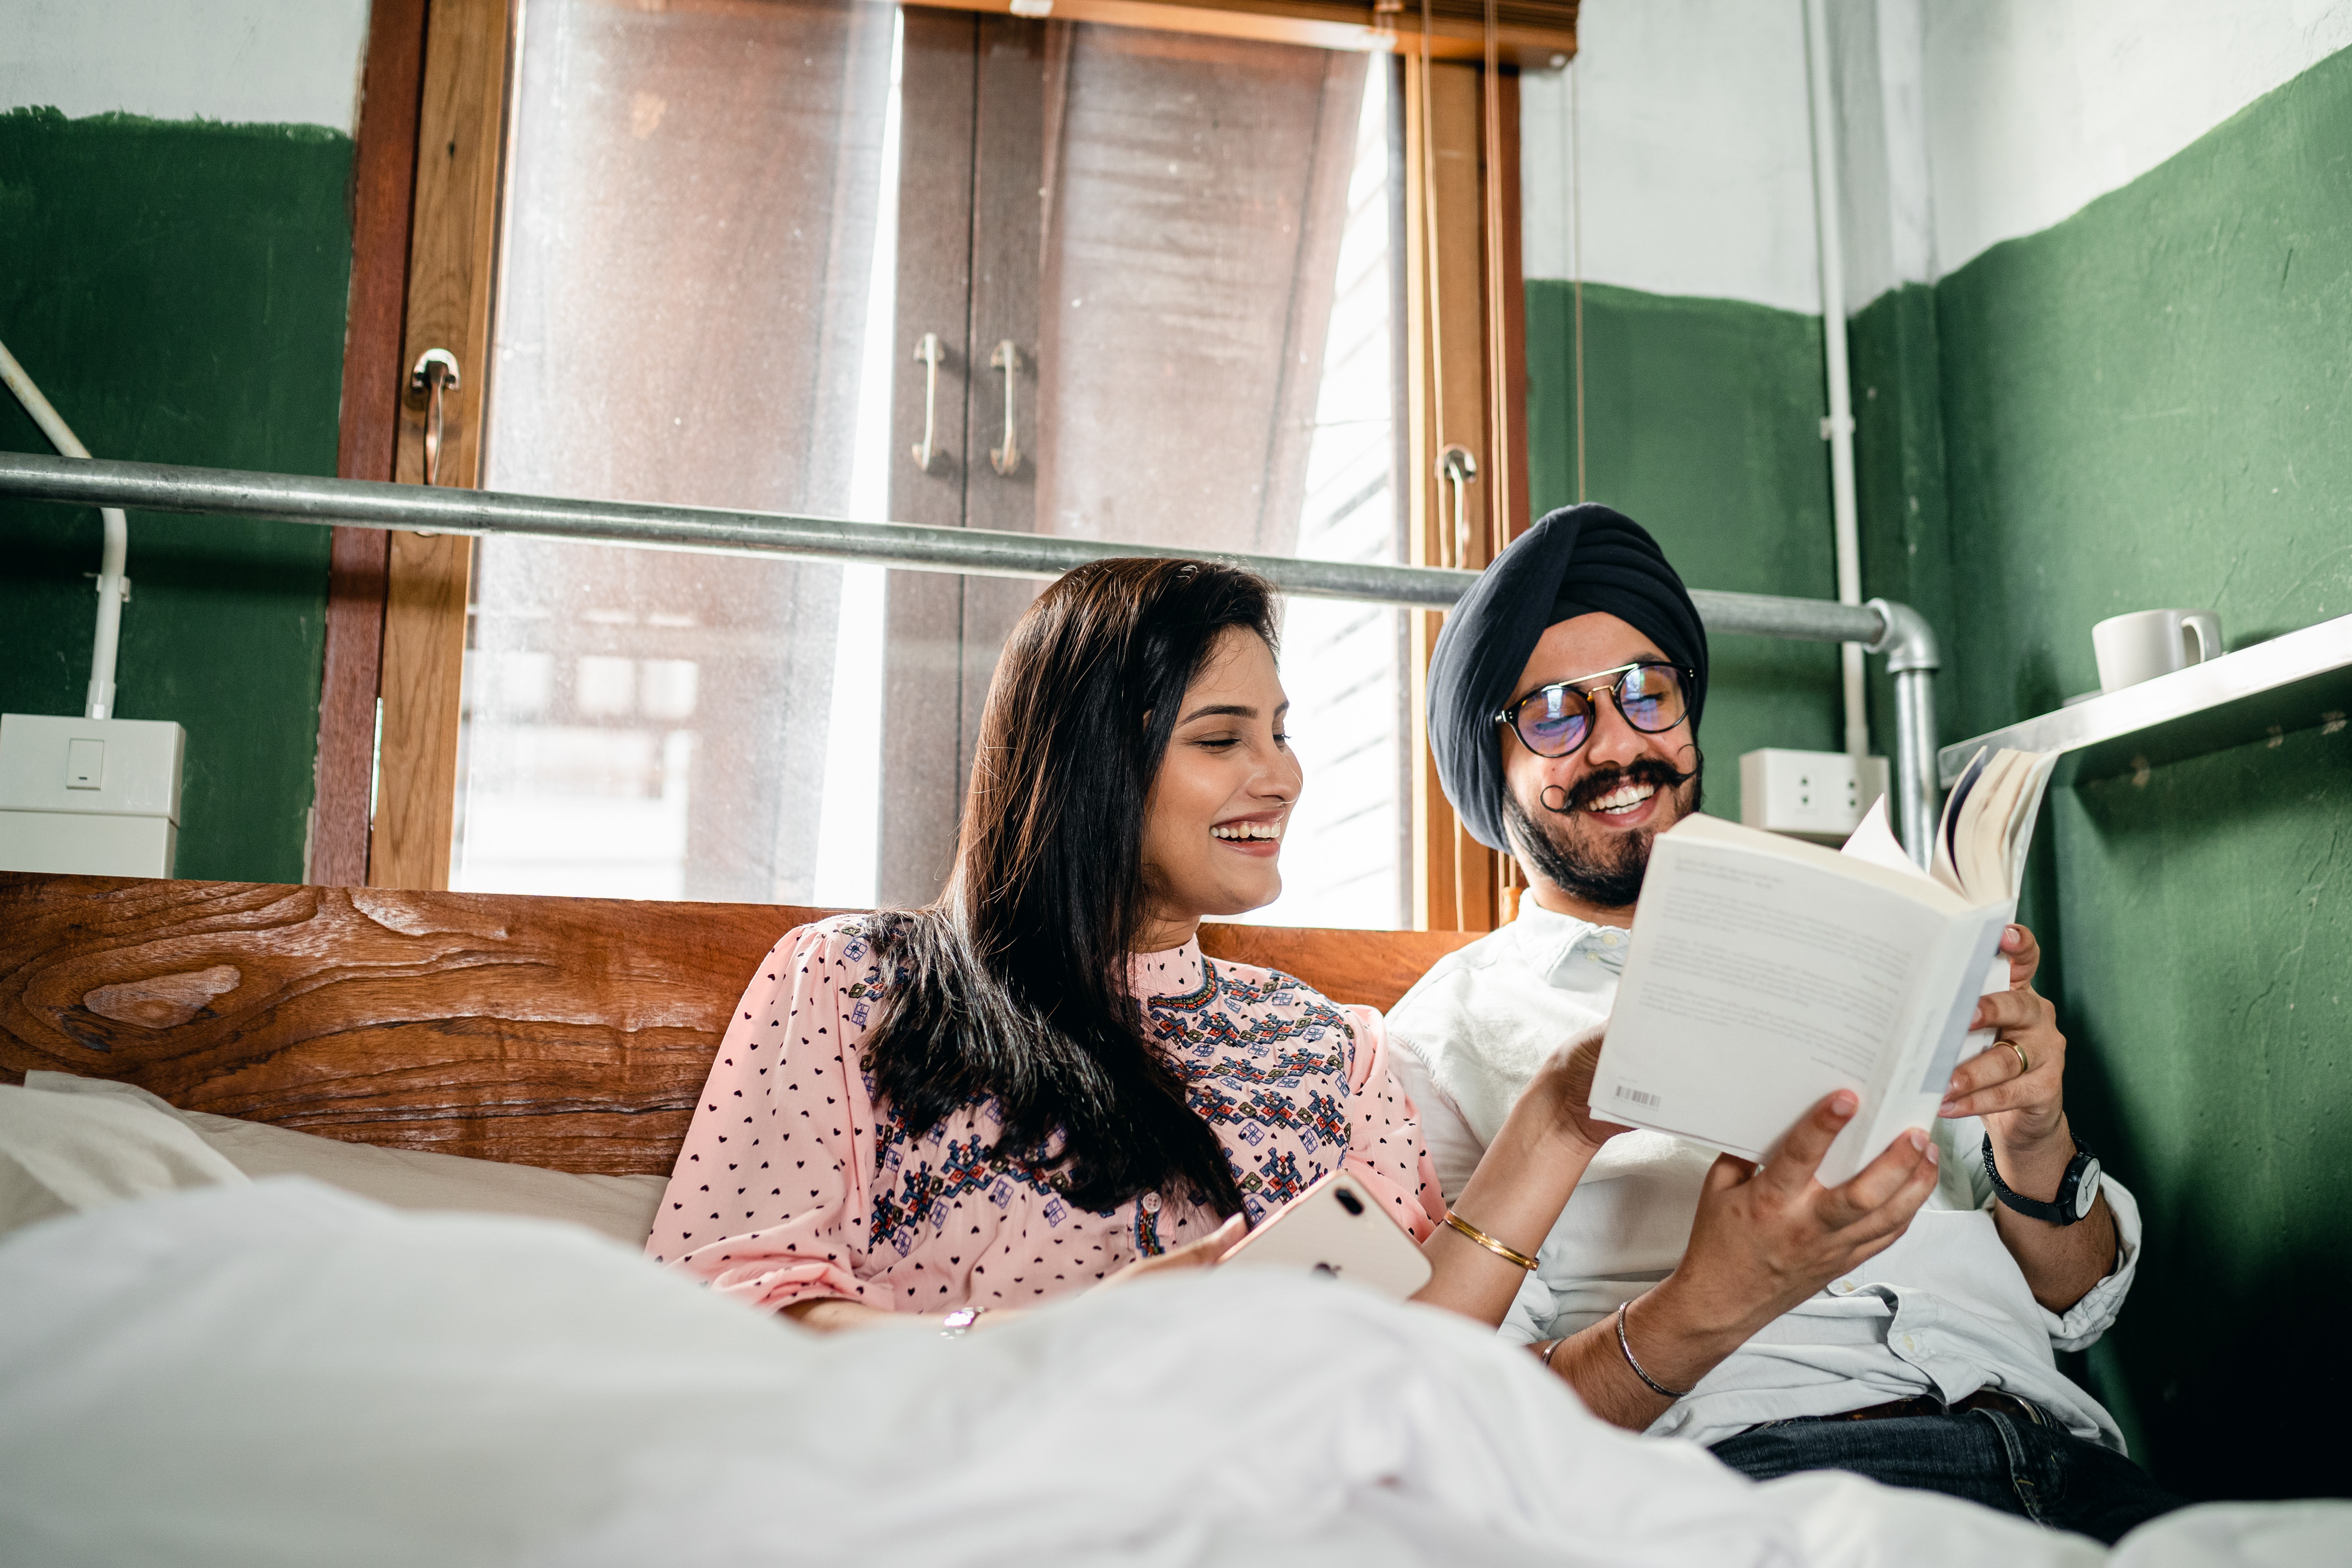 A couple reading and laughing in bed together. | Source: Pexels